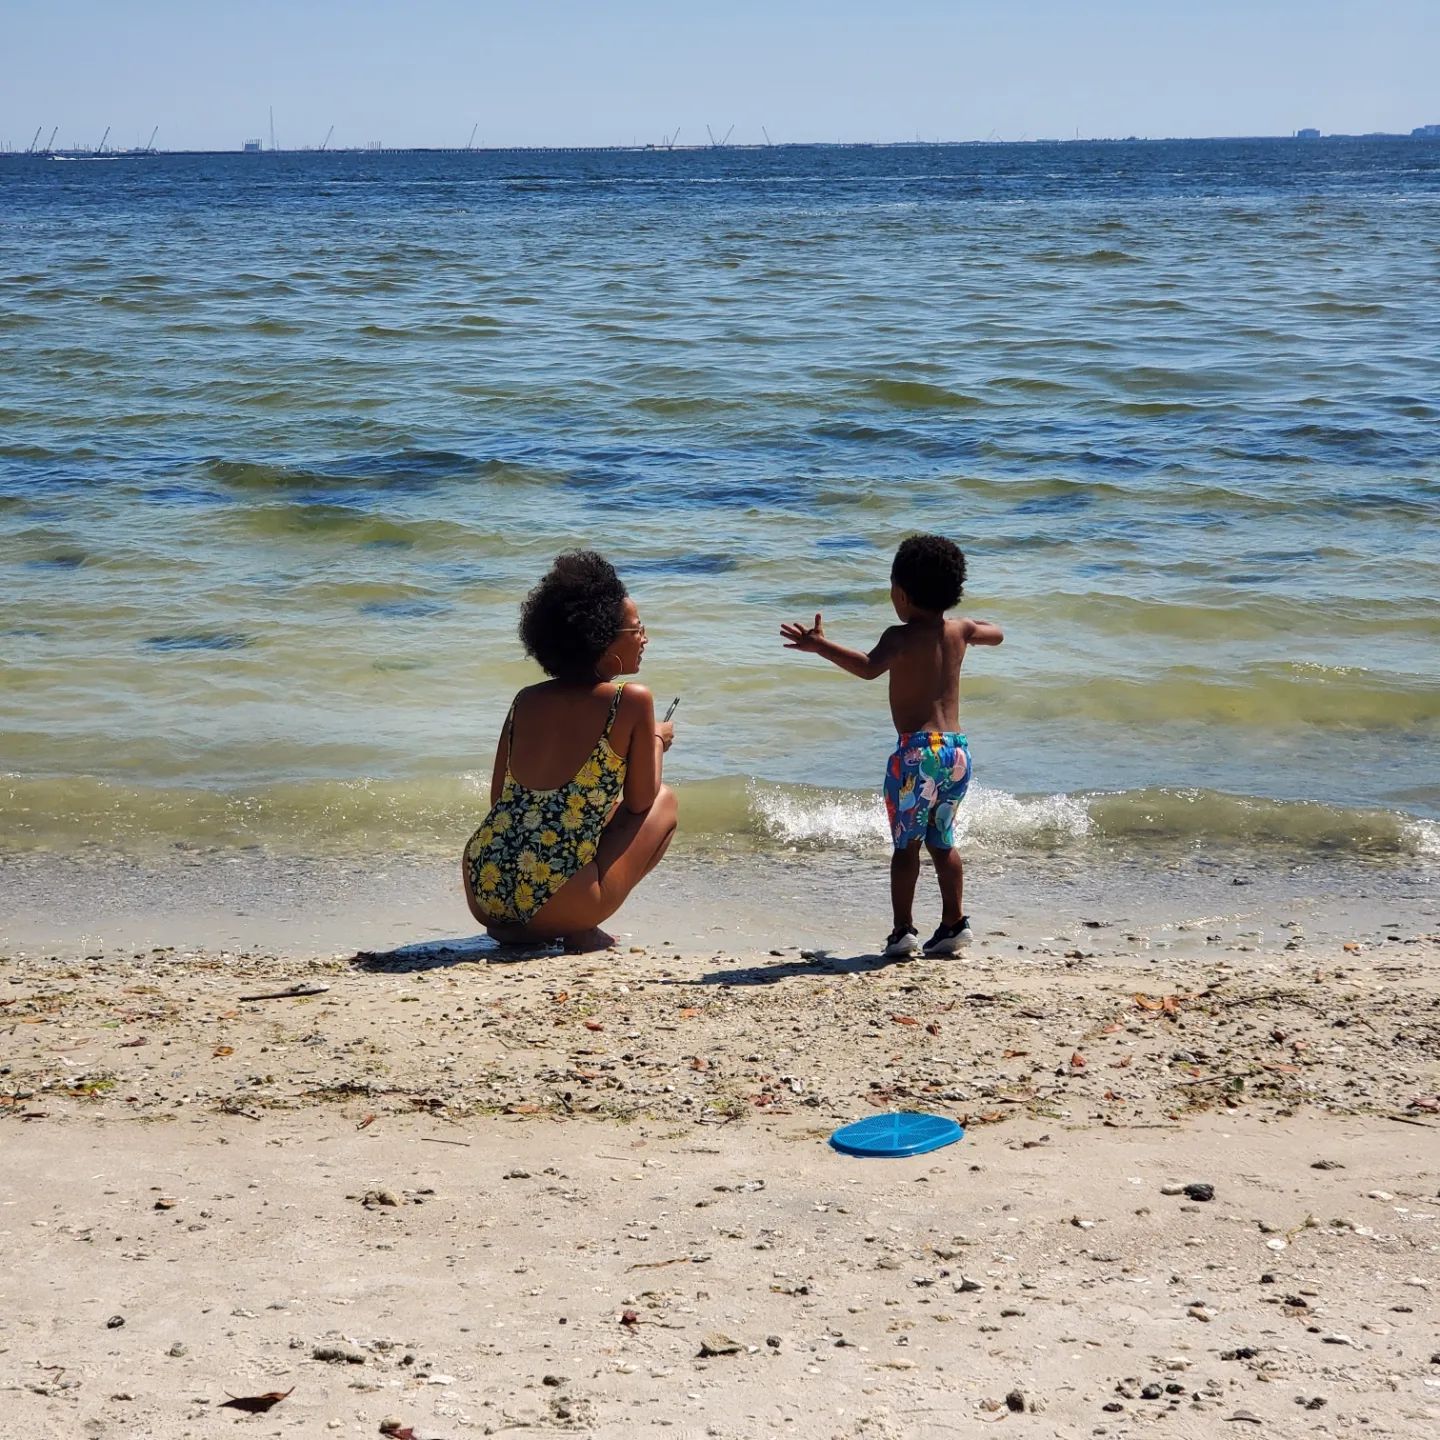 A mom and her child playing on the beach in Tampa. Photo by Instagram user @morelessrene